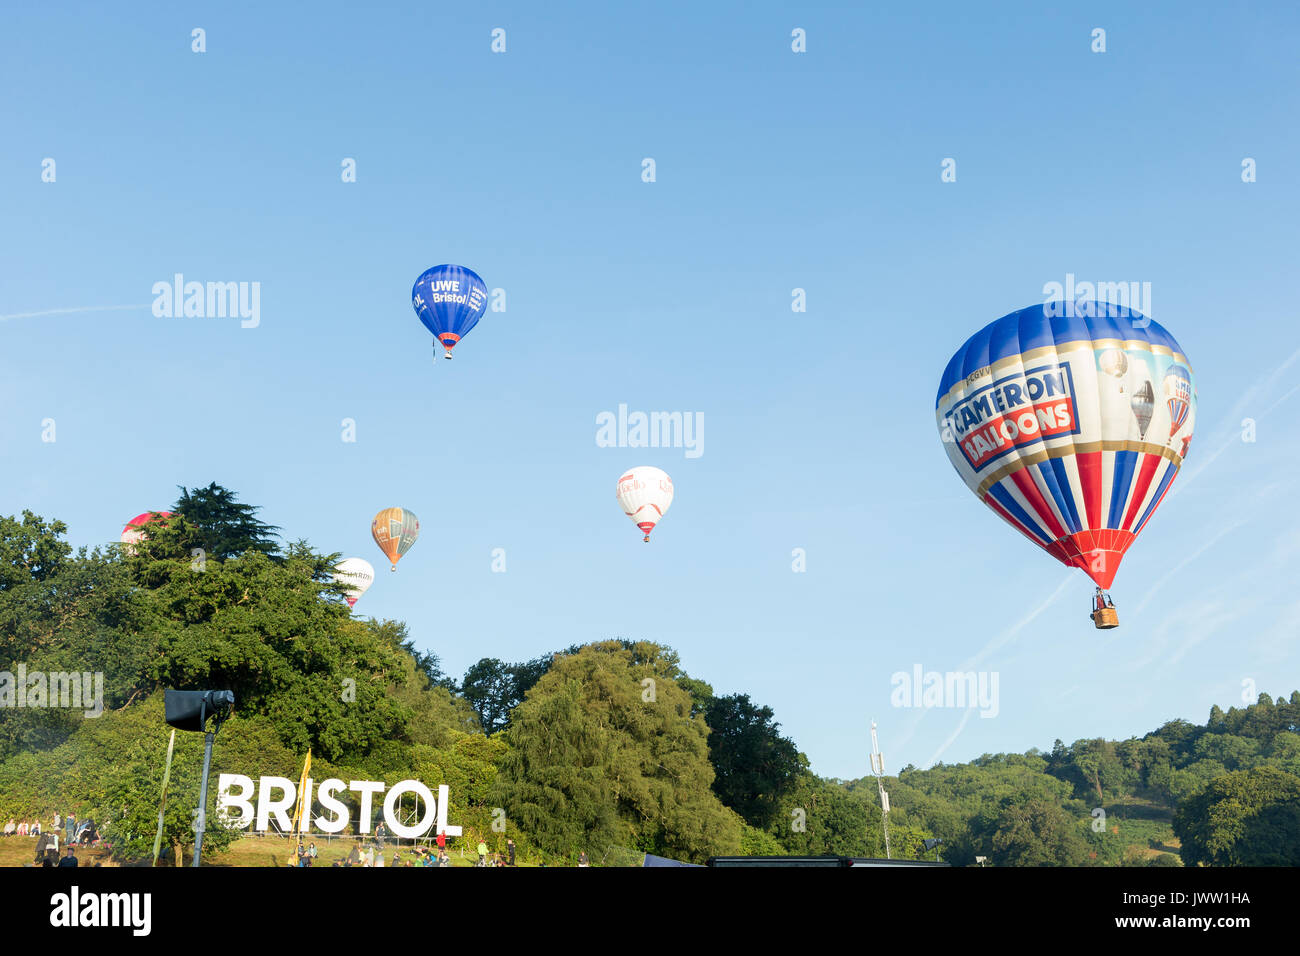 Ashton Court, Bristol, UK. 13 August 2017. The third successful mass ascent sees 111 hot air balloons launch from this year’s Bristol International Balloon Fiesta. After high winds on Saturday evening, the weather was much improved to almost perfect hot air ballooning conditions which allowed a spectacular mass ascent. The skies were filled with lots of beautiful coloured hot air balloons including a number of special shapes like the minion balloon. Credit: Neil Cordell/Alamy Live News Stock Photo